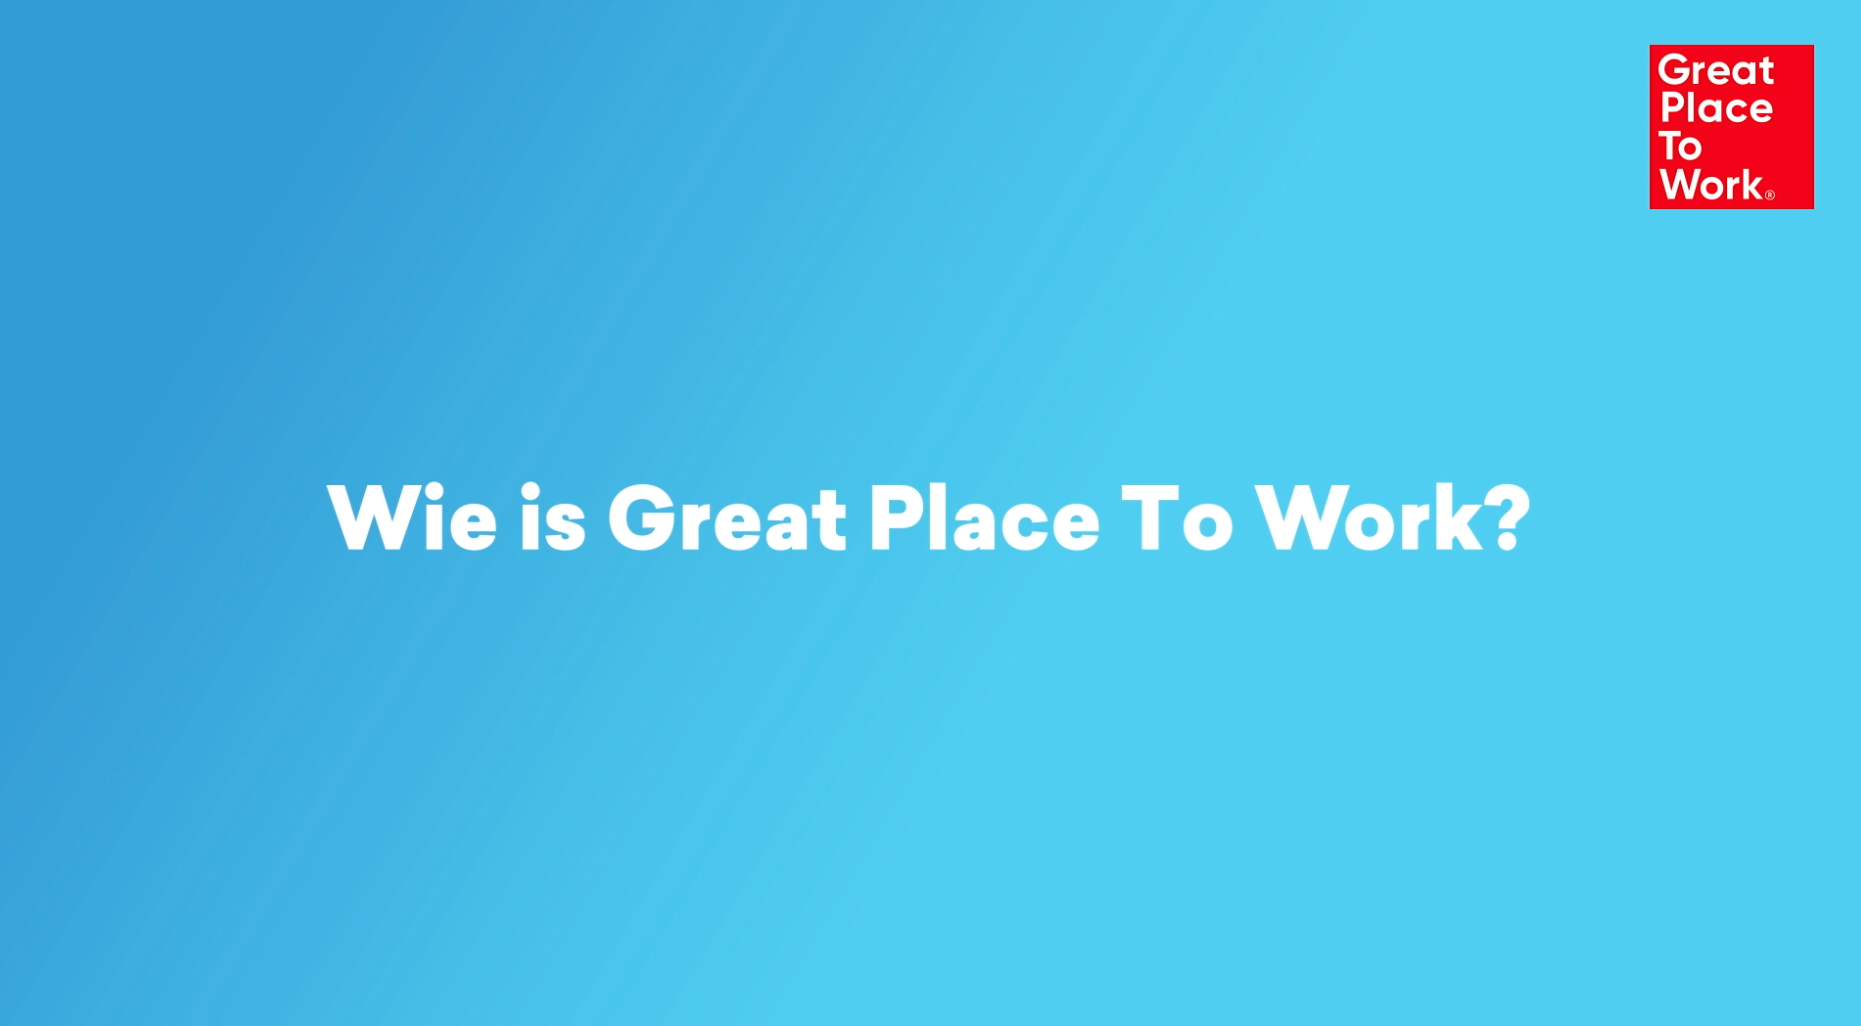 Wie is Great Place To Work?